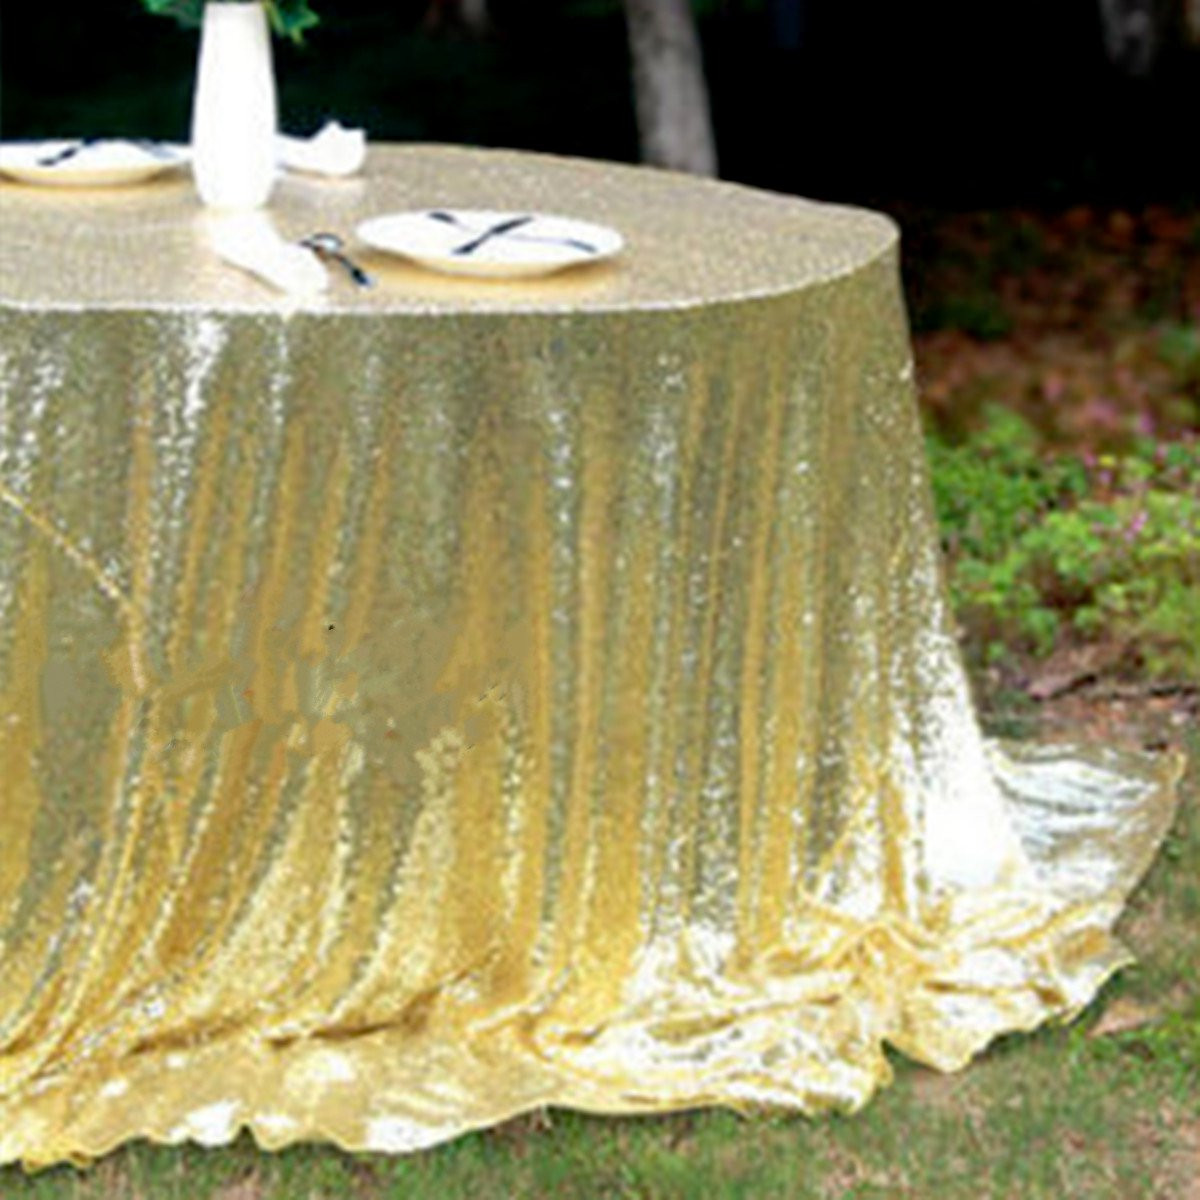 128x115cm-Champagne-Gold-Sparkly-Sequin-Tablecloth-Photo-Backdrop-Background-Studio-Prop-1169412-2